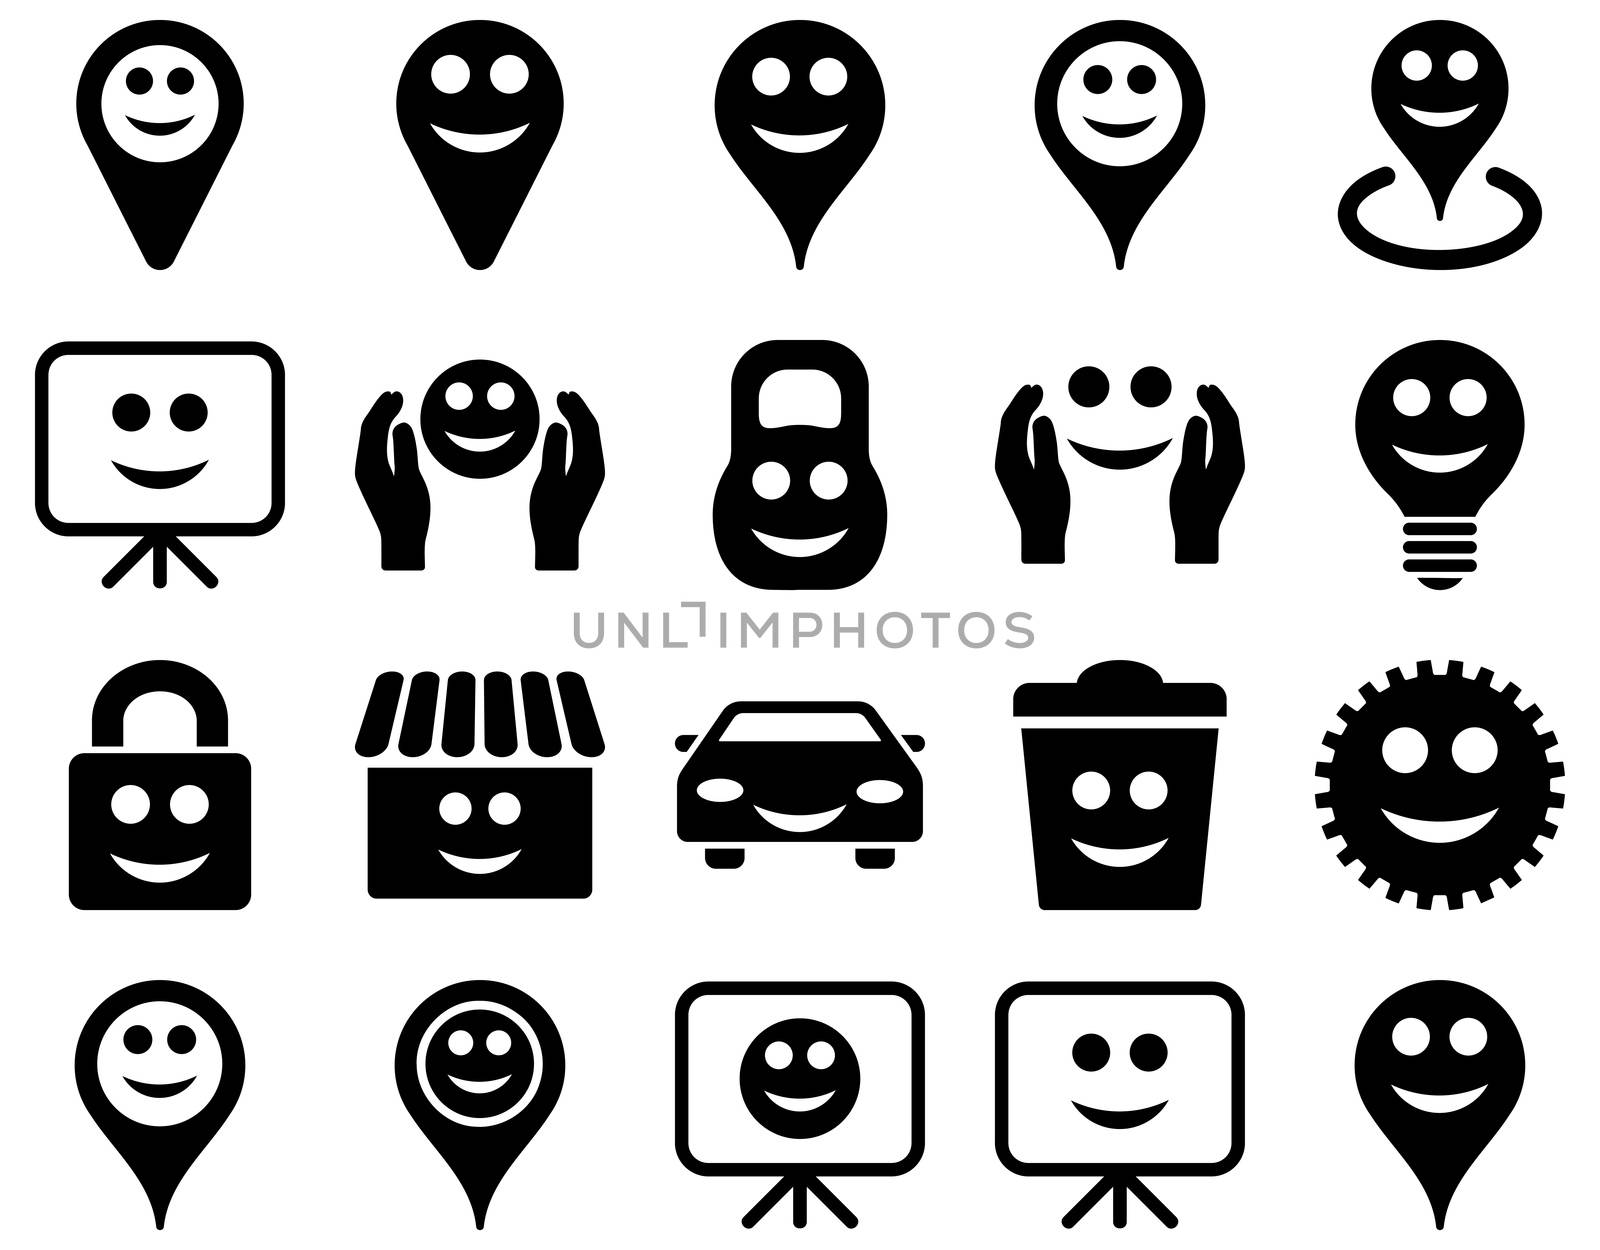 Tools, options, smiles, objects icons. Glyph set style is flat images, black symbols, isolated on a white background.